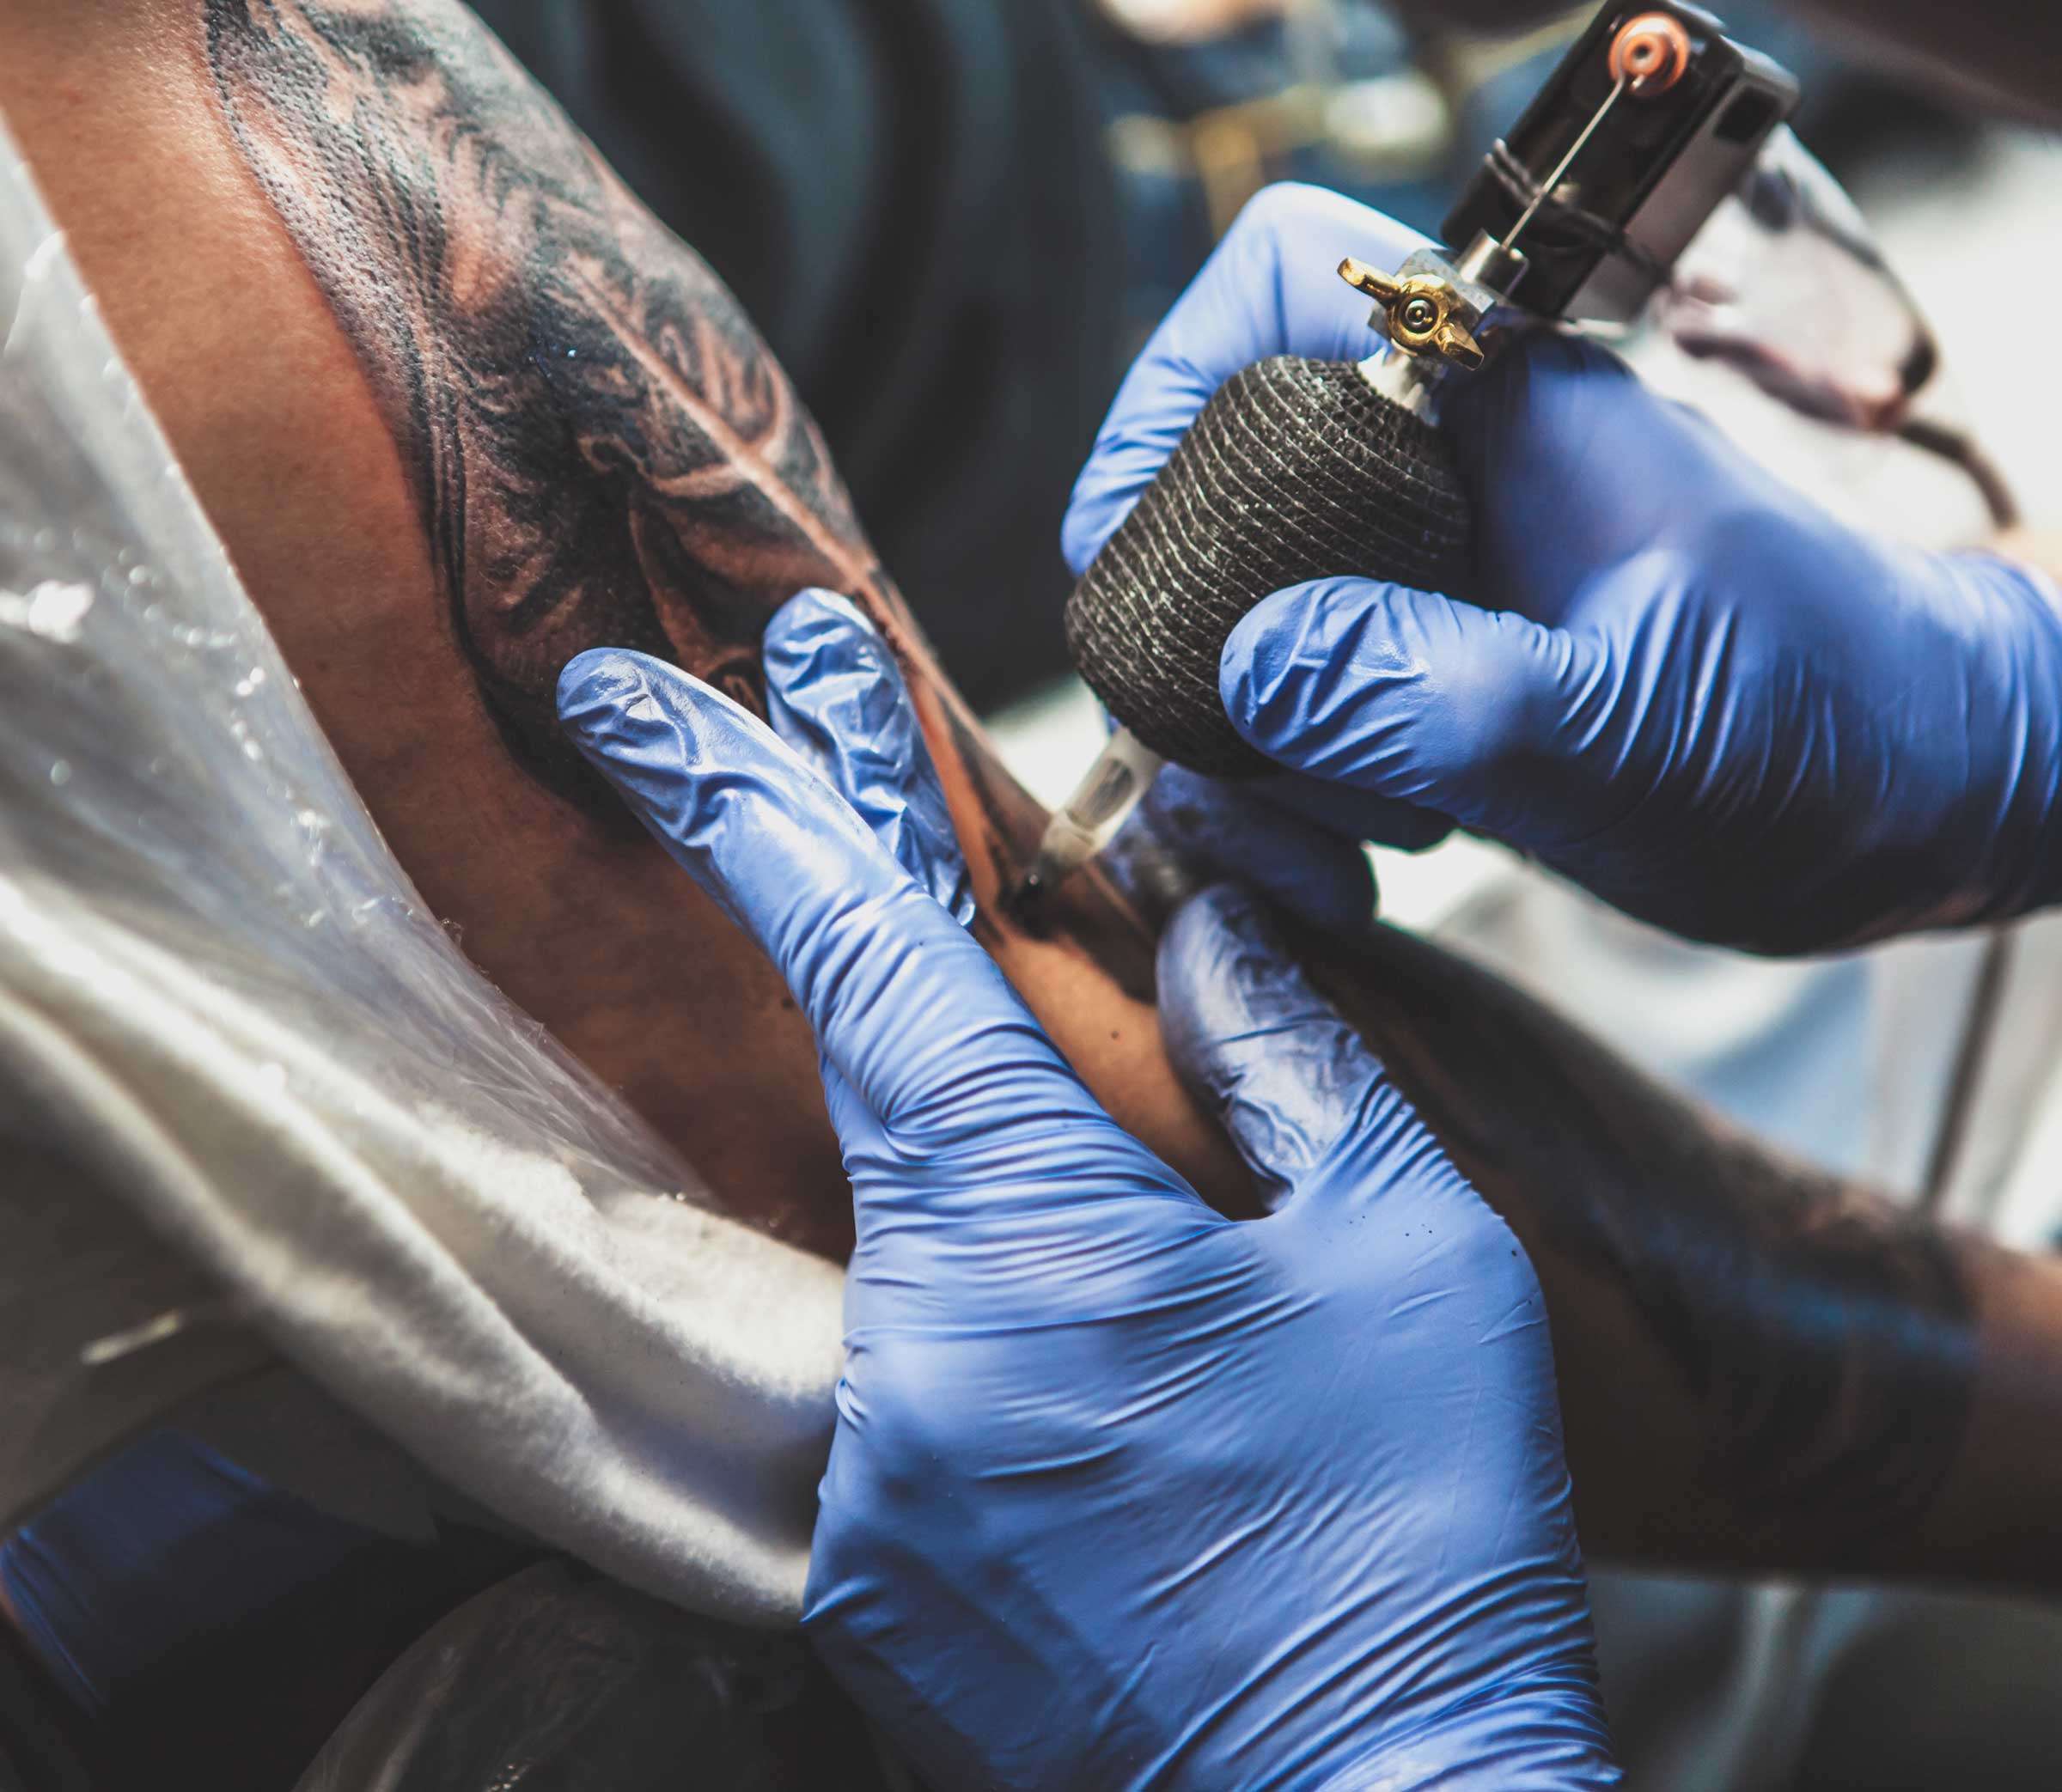 Trending News: Micro Tattoos and Piercing